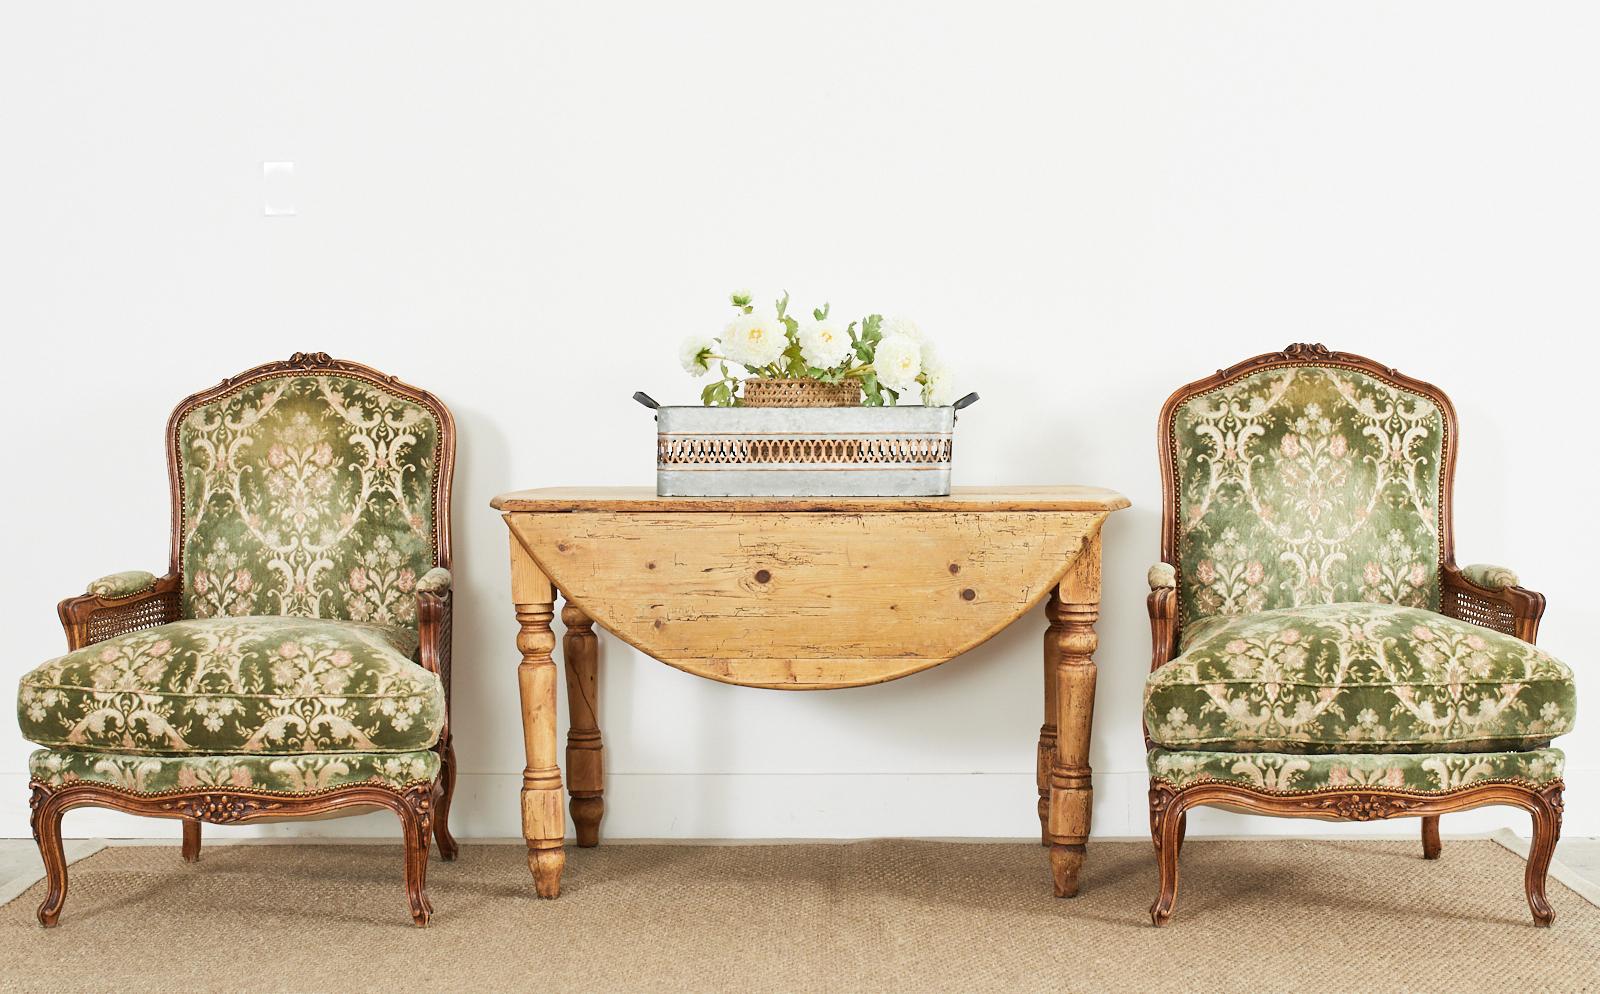 Gorgeous pair of country French provincial bergere armchairs or lounge chairs crafted from walnut. The chairs feature a beautifully carved frame with molded arms and classic flat backrest. The arms have double caned sides and a generous seat with a